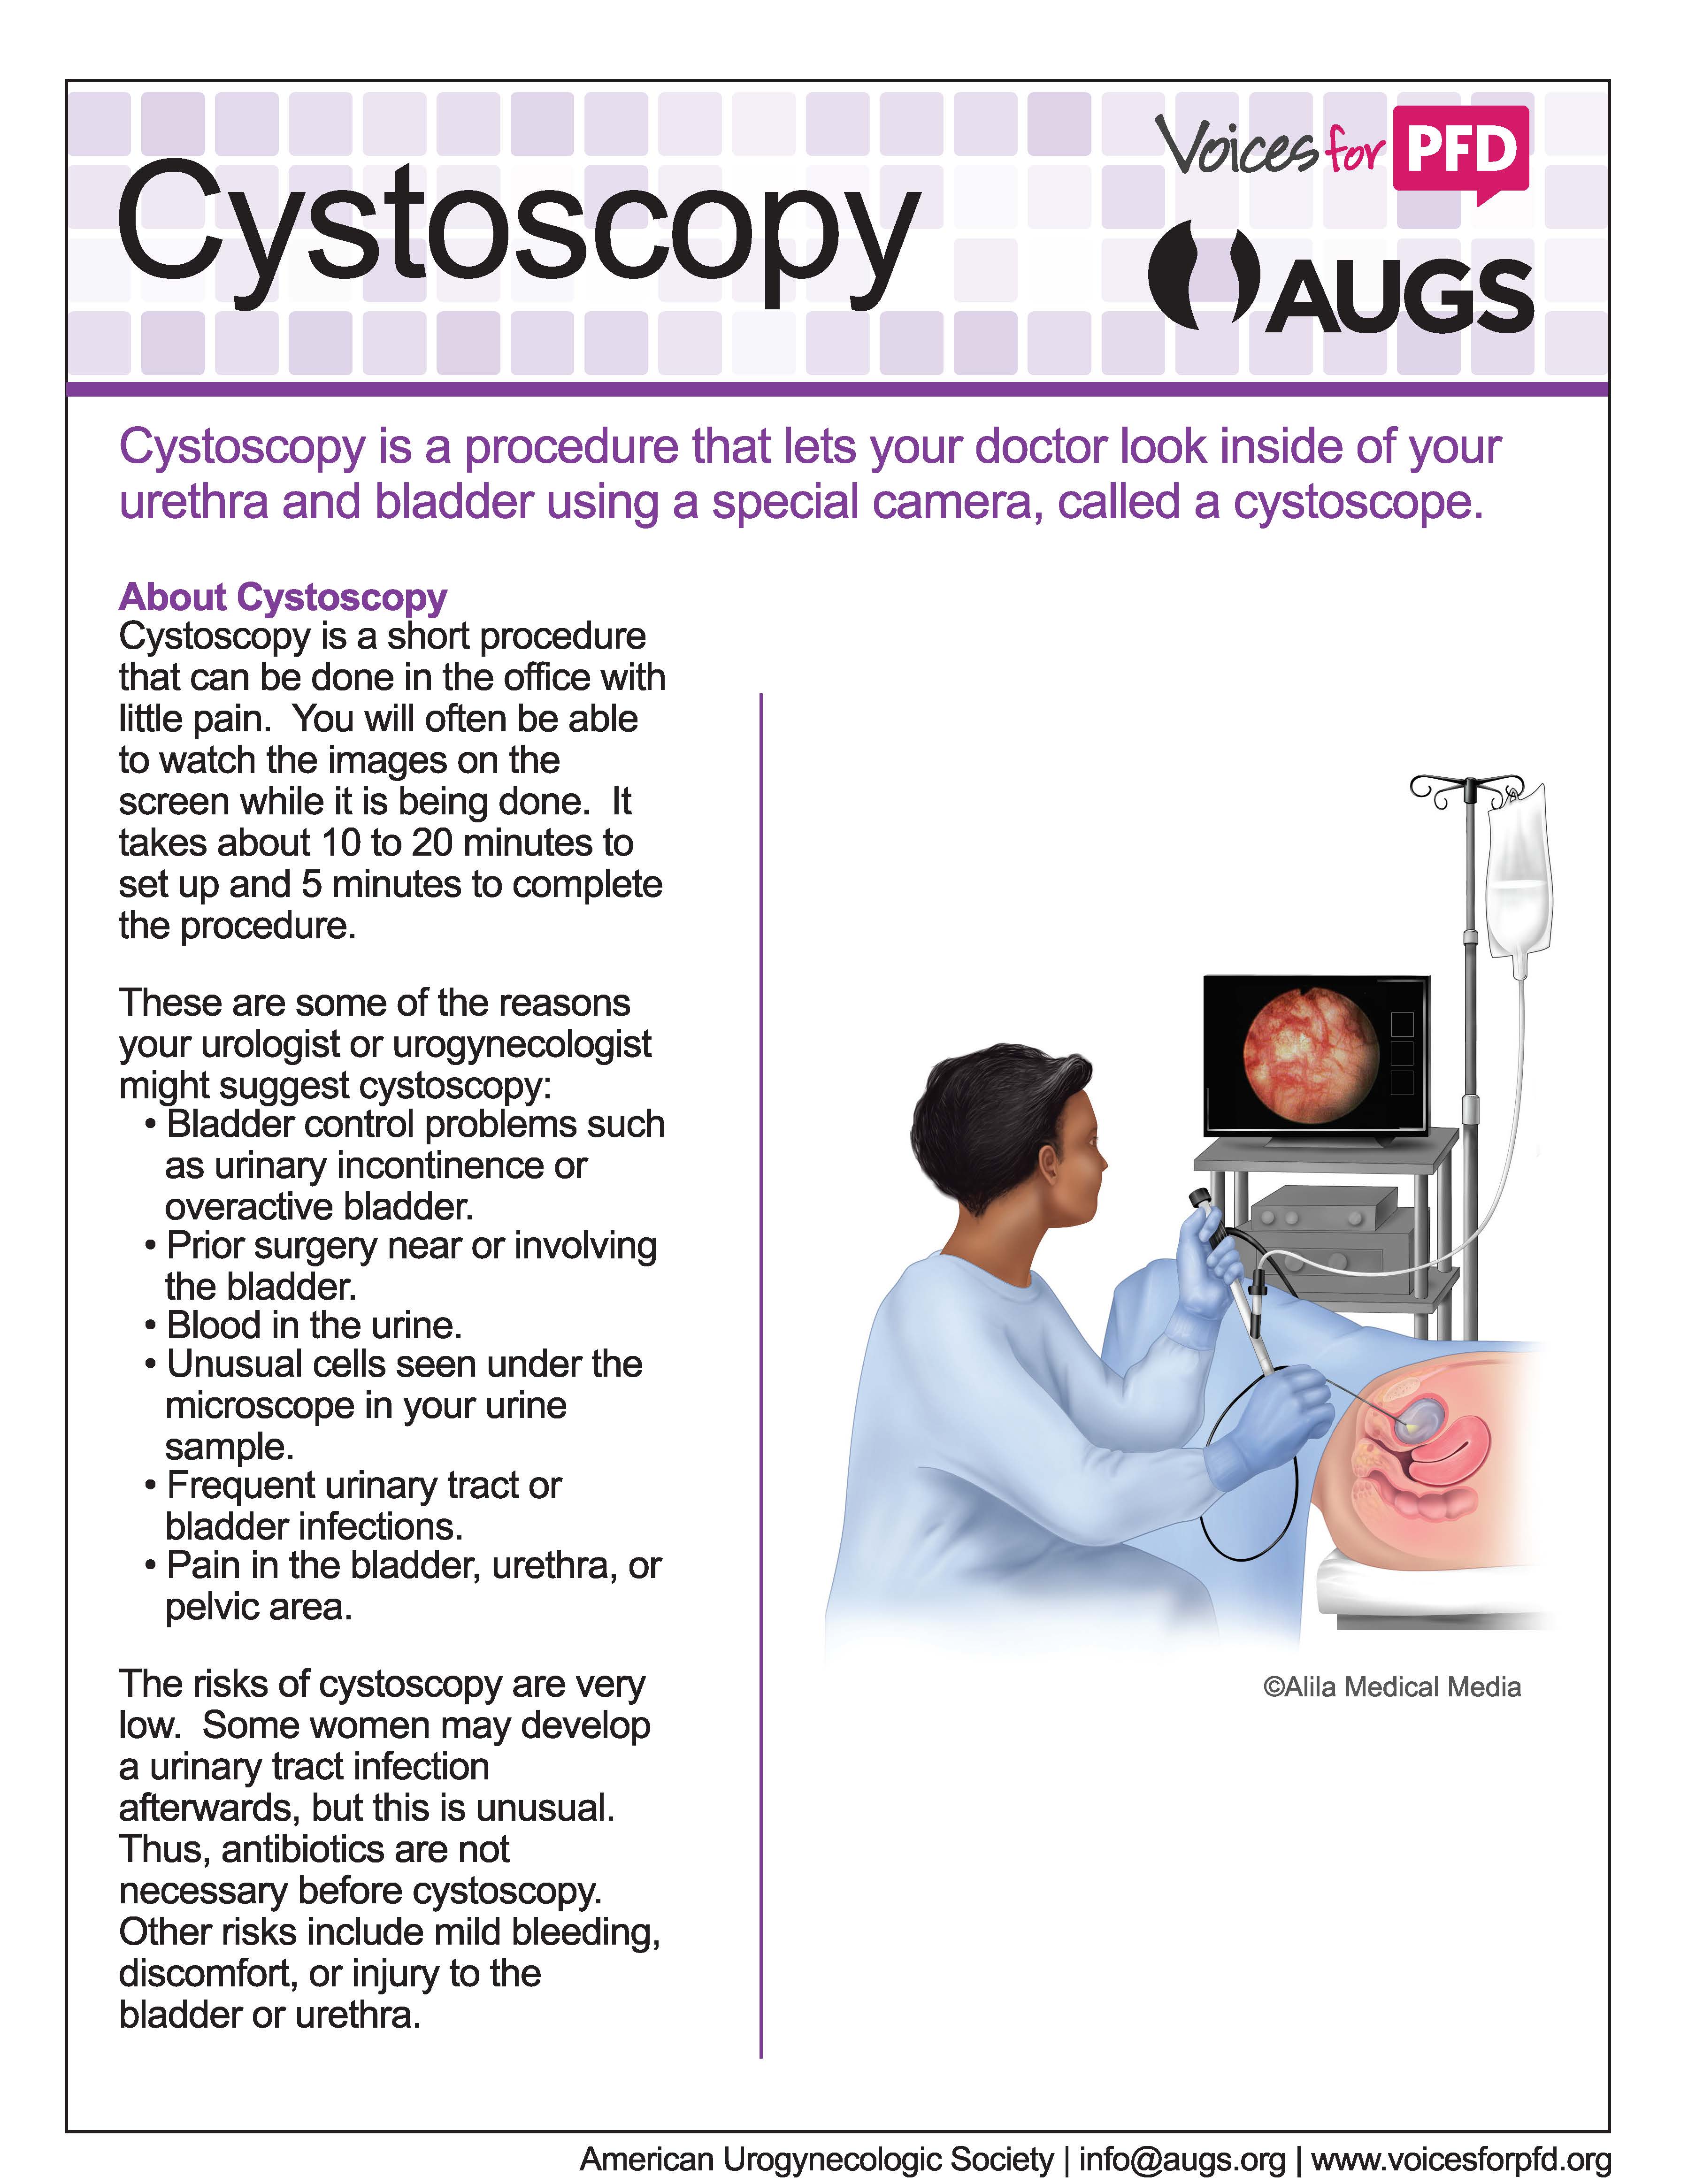 https://www.voicesforpfd.org/assets/2/6/Cystoscopy_Large_Print_Page_1.jpg